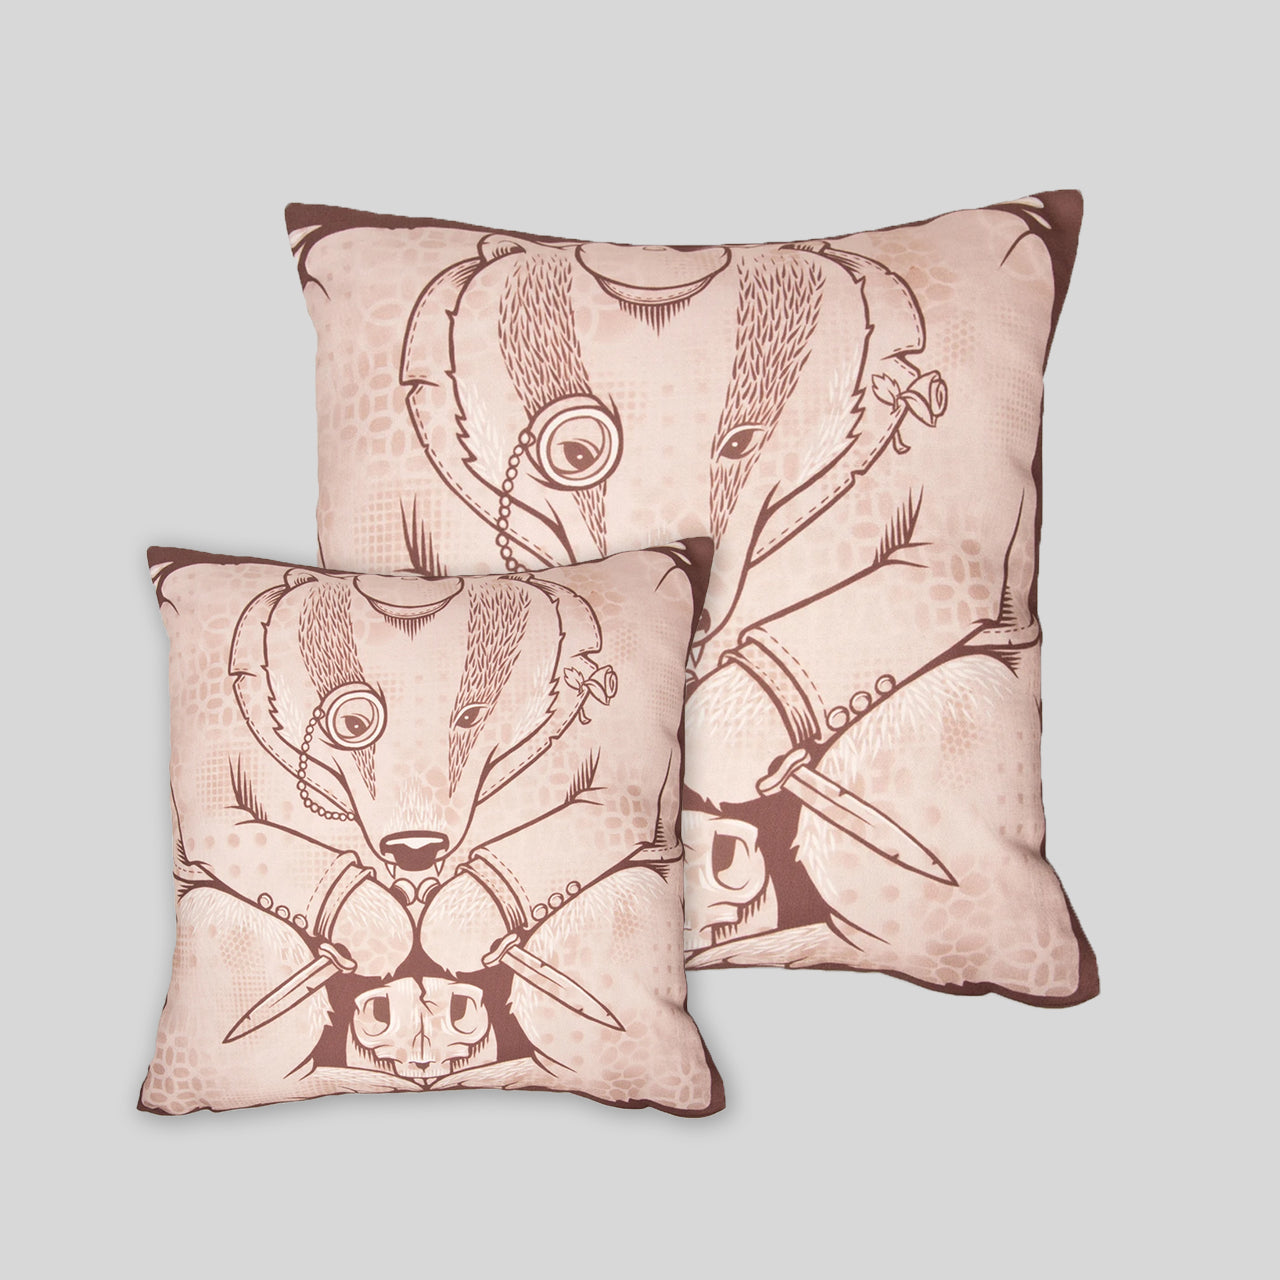 The Badgers Pillow Cover by Jeremy Fish